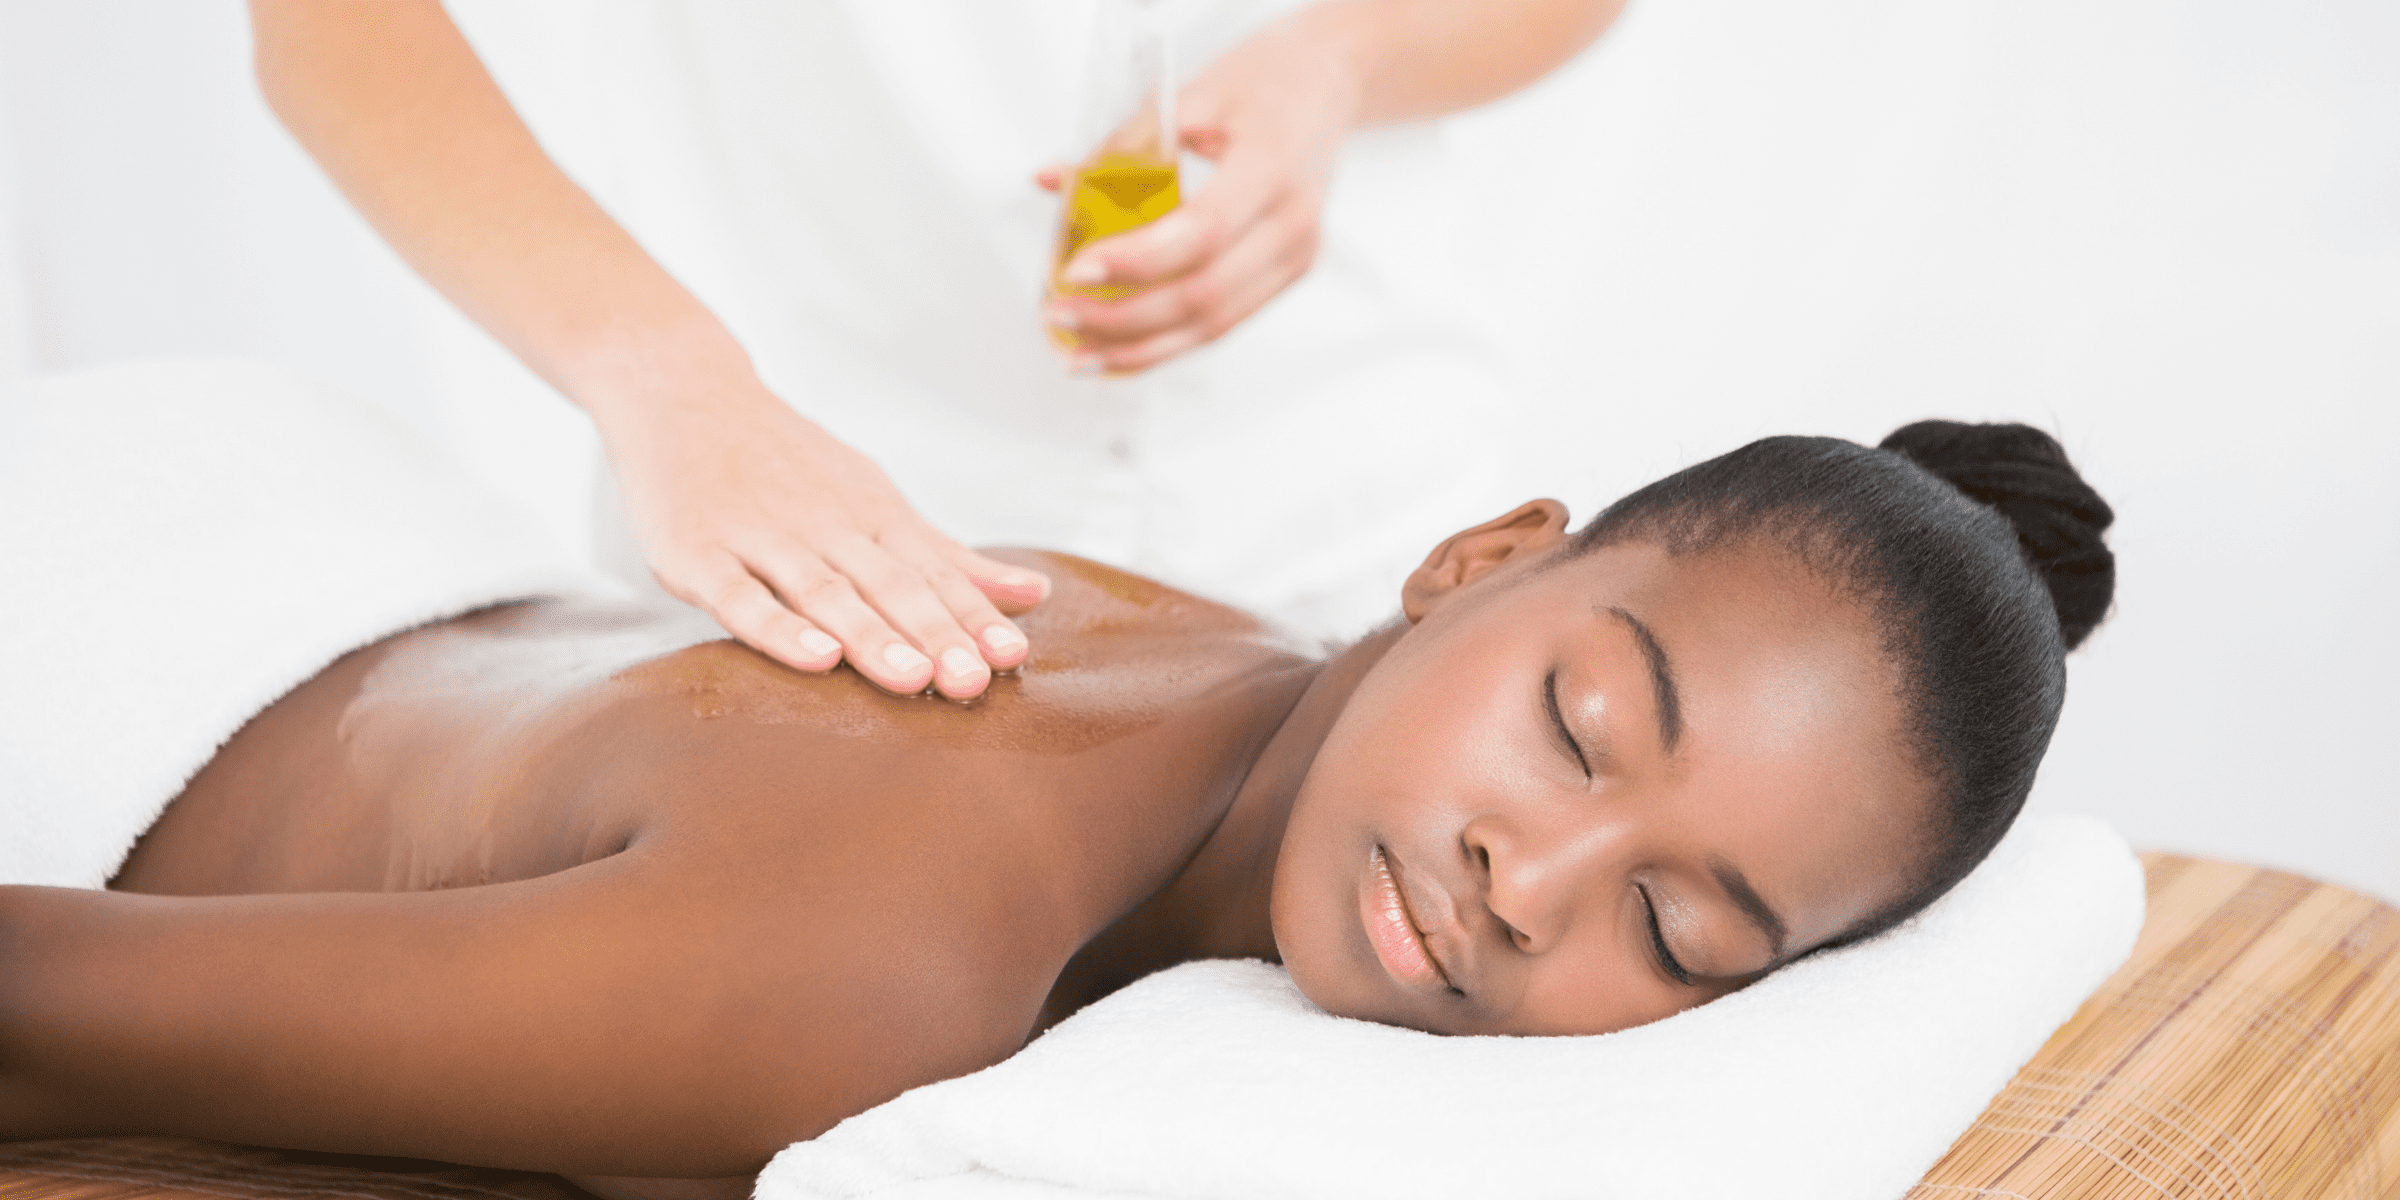 young black woman getting massage oil poured on her